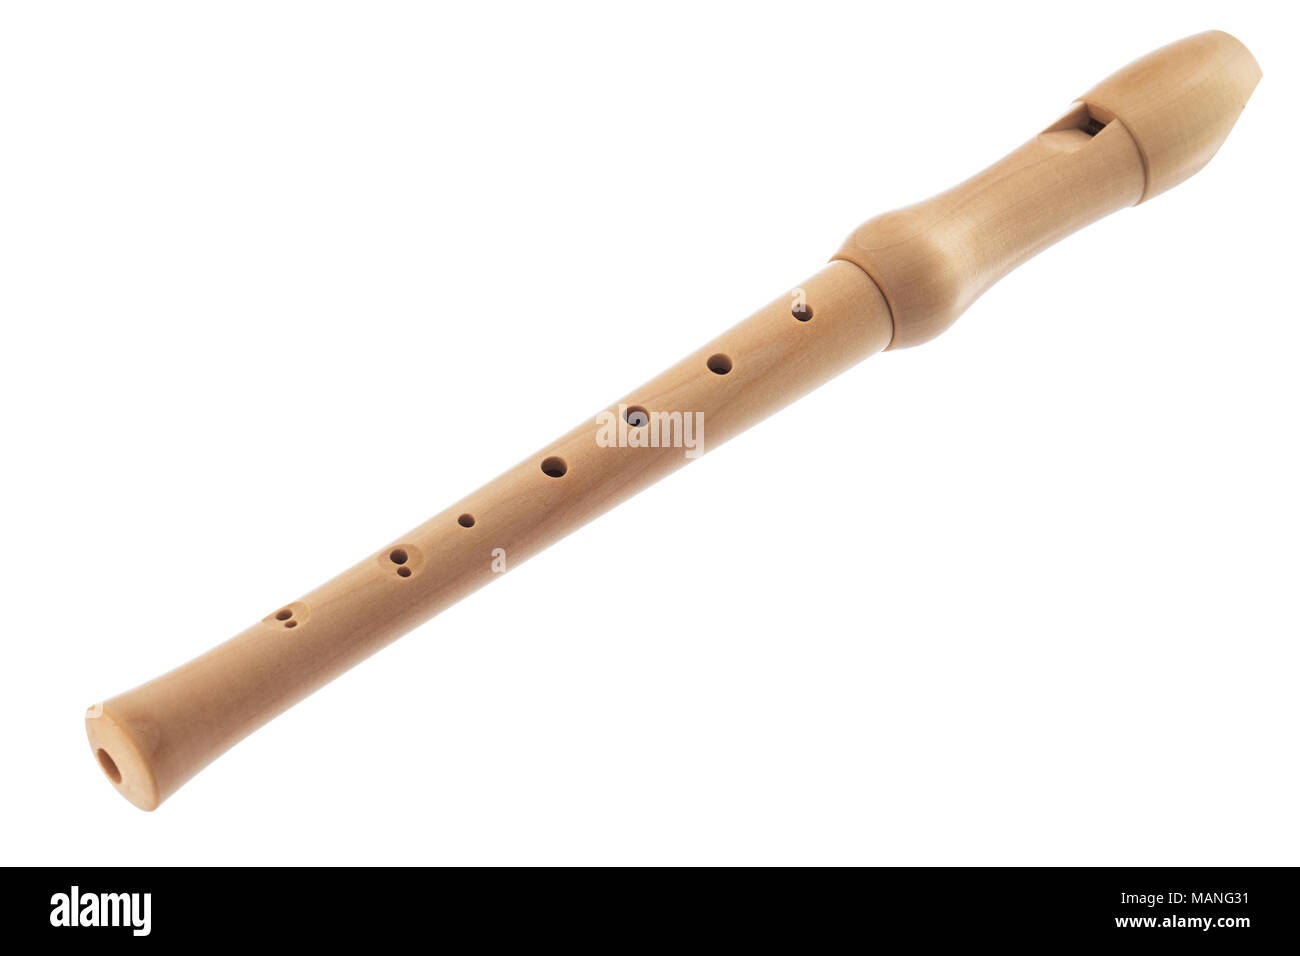 Single recorder. Wooden soprano flute isolated on a white background Stock Photo